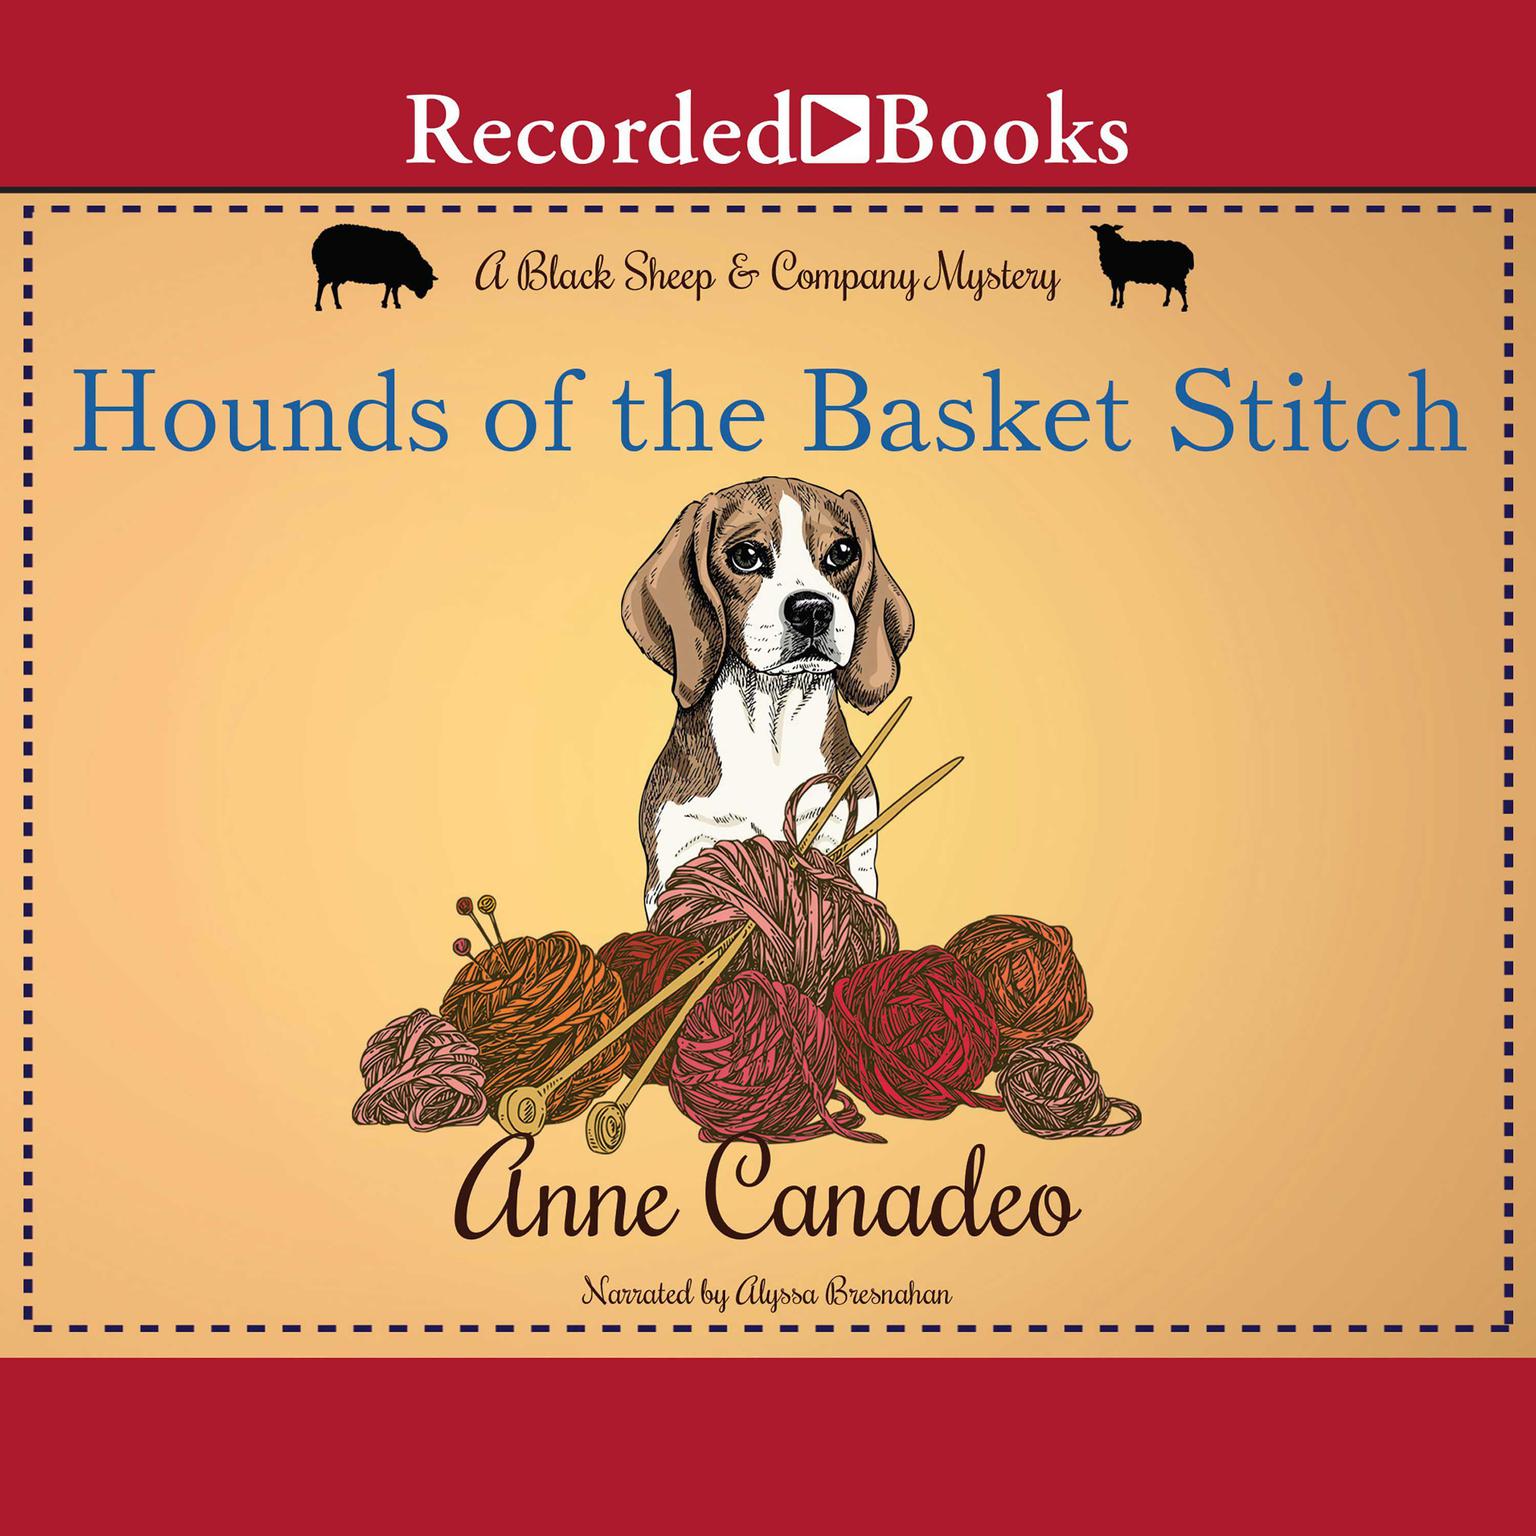 Hounds of the Basket Stitch Audiobook, by Anne Canadeo